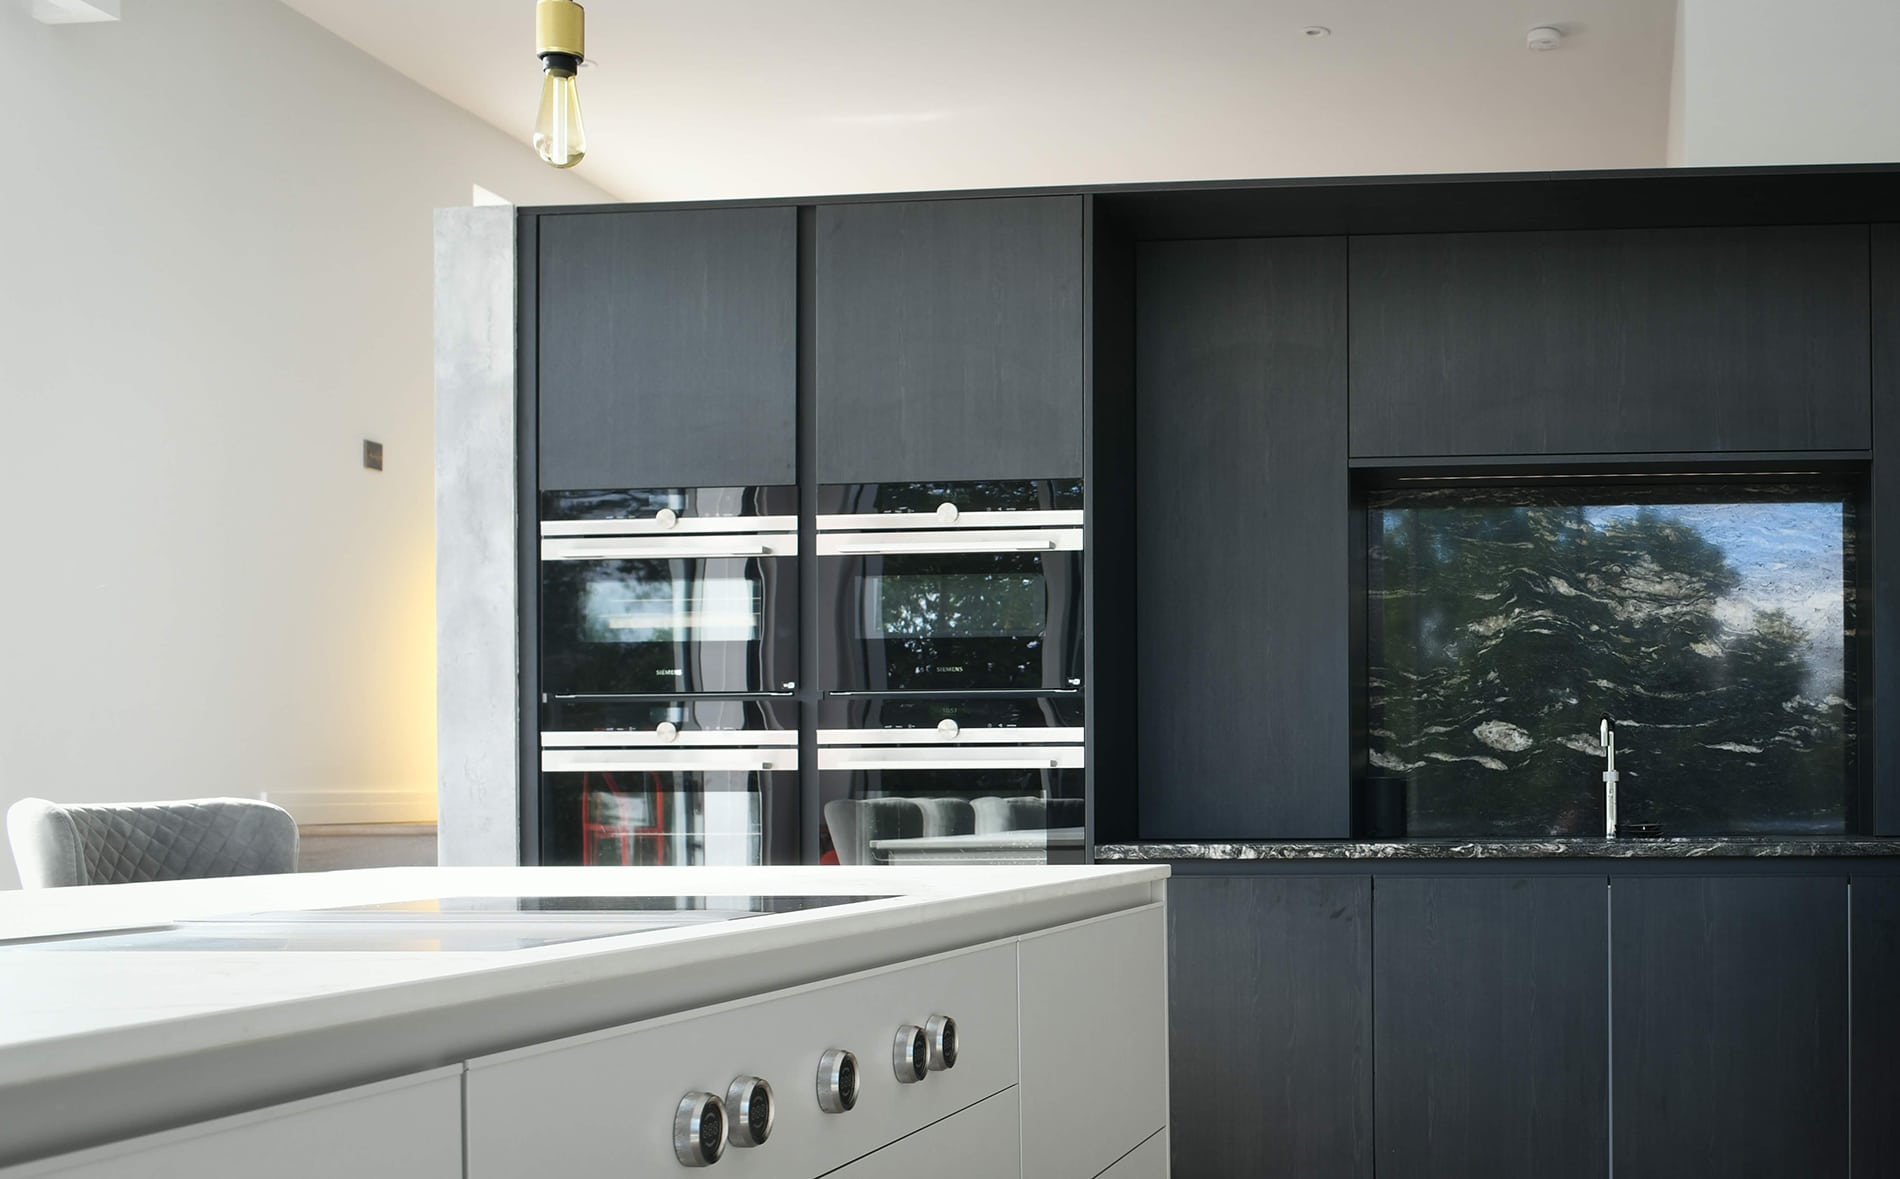 Getting the ‘wow’ factor in a light and large kitchen space 2